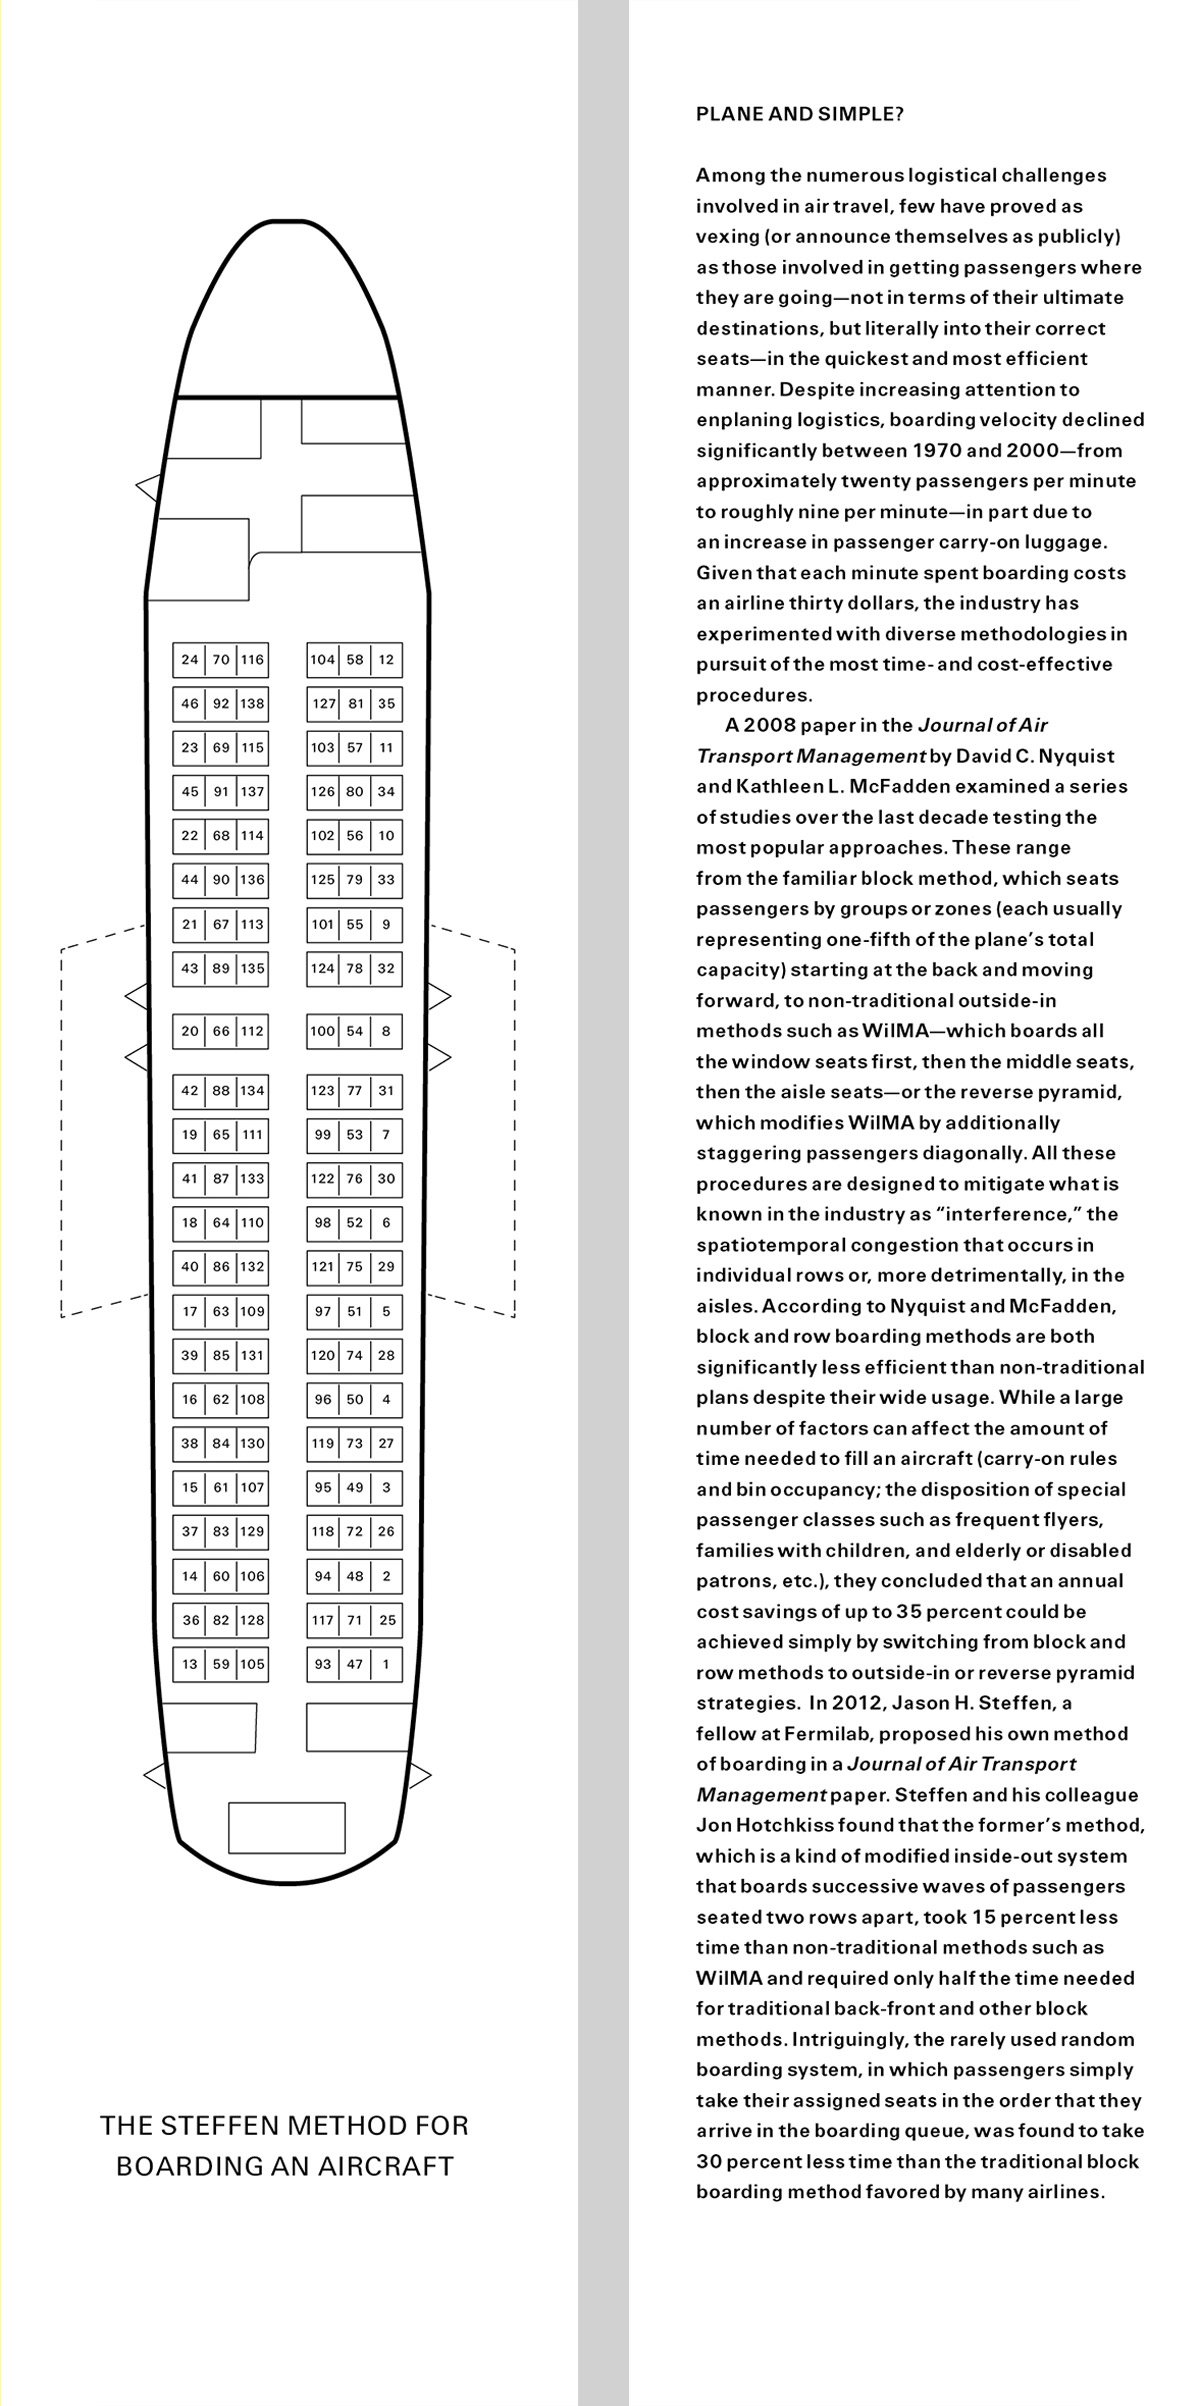 The bookmark from this issue. One side has a seating plan for an airplane with text that says: “The Steffen Method for Boarding an Aircraft.” The verso reads: PLANE AND SIMPLE? Among the numerous logistical challenges involved in air travel, few have proved as vexing (or announce themselves as publicly) as those involved in getting passengers where they are going—not in terms of their ultimate destinations, but literally into their correct seats—in the quickest and most efficient manner. Despite increasing attention to enplaning logistics, boarding velocity declined significantly between nineteen seventy and two thousand—from approximately twenty passengers per minute to roughly nine per minute—in part due to an increase in passenger carry-on luggage. Given that each minute spent boarding costs an airline thirty dollars, the industry has experimented with diverse methodologies in pursuit of the most time- and cost-effective procedures. A two thousand and eight paper in the Journal of Air Transport Management by David C. Nyquist and Kathleen L. McFadden examined a series of studies over the last decade testing the most popular approaches. These range
from the familiar block method, which seats passengers by groups or zones (each usually representing one-fifth of the plane’s total capacity) starting at the back and moving forward, to non-traditional outside-in methods such as WilMA—which boards all
the window seats first, then the middle seats, then the aisle seats—or the reverse pyramid, which modifies WilMA by additionally staggering passengers diagonally. All these procedures are designed to mitigate what is known in the industry as “interference,” the spatiotemporal congestion that occurs in individual rows or, more detrimentally, in the aisles. According to Nyquist and McFadden, block and row boarding methods are both significantly less efficient than non-traditional plans despite their wide usage. While a large number of factors can affect the amount of time needed to fill an aircraft (carry-on rules and bin occupancy; the disposition of special passenger classes such as frequent flyers, families with children, and elderly or disabled patrons, etc.), they concluded that an annual cost savings of up to 35 percent could be achieved simply by switching from block and row methods to outside-in or reverse pyramid strategies. In two thousand and twelve, Jason H. Steffen, a fellow at Fermilab, proposed his own method of boarding in a Journal of Air Transport Management paper. Steffen and his colleague Jon Hotchkiss found that the former’s method, which is a kind of modified inside-out system that boards successive waves of passengers seated two rows apart, took 15 percent less time than non-traditional methods such as WilMA and required only half the time needed for traditional back-front and other block methods. Intriguingly, the rarely used random boarding system, in which passengers simply take their assigned seats in the order that they arrive in the boarding queue, was found to take 30 percent less time than the traditional block boarding method favored by many airlines.